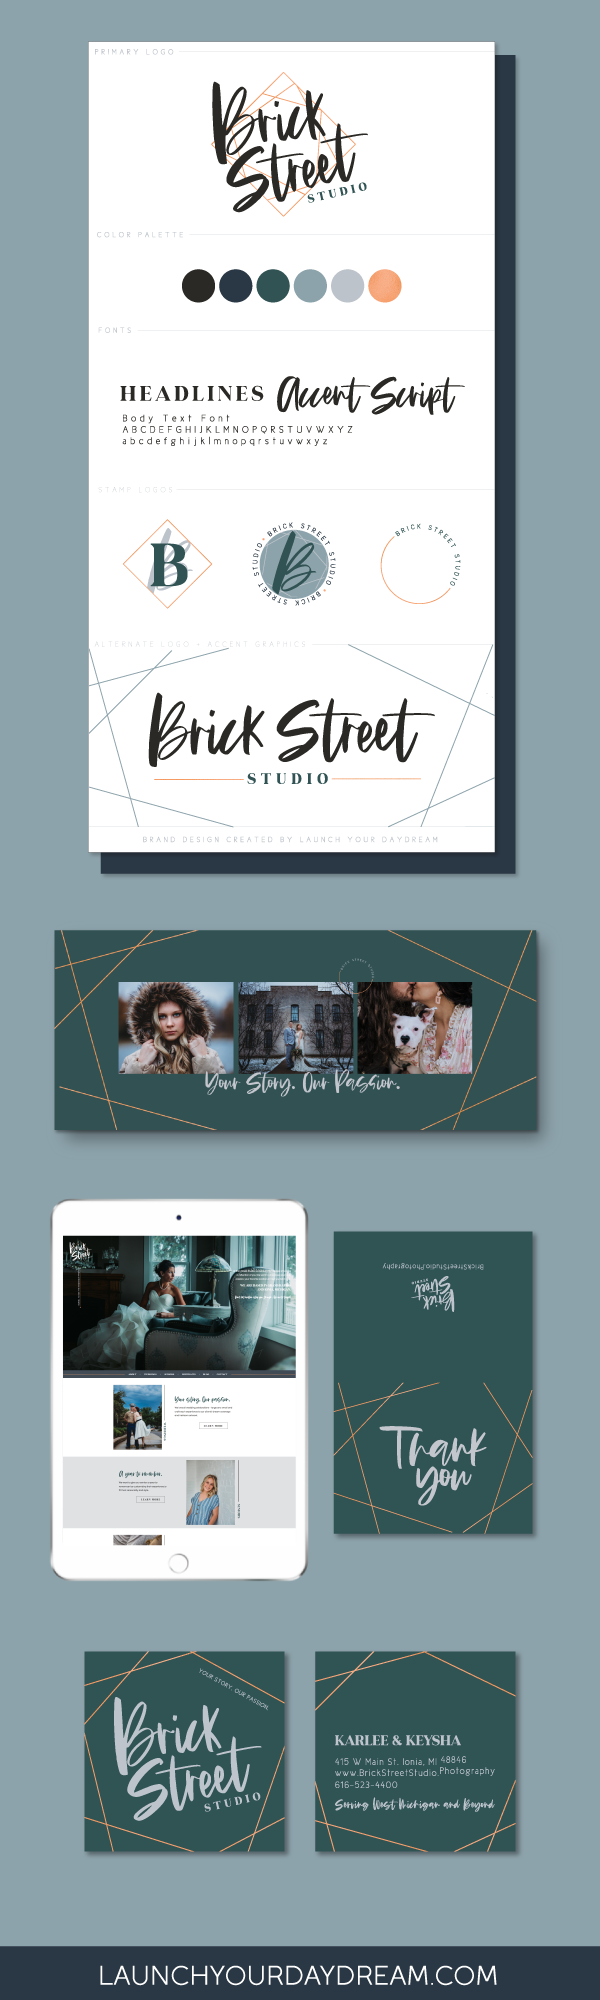 This is a bold and upscale brand design portfolio and Showit web design for photographer, Brick Street Studio